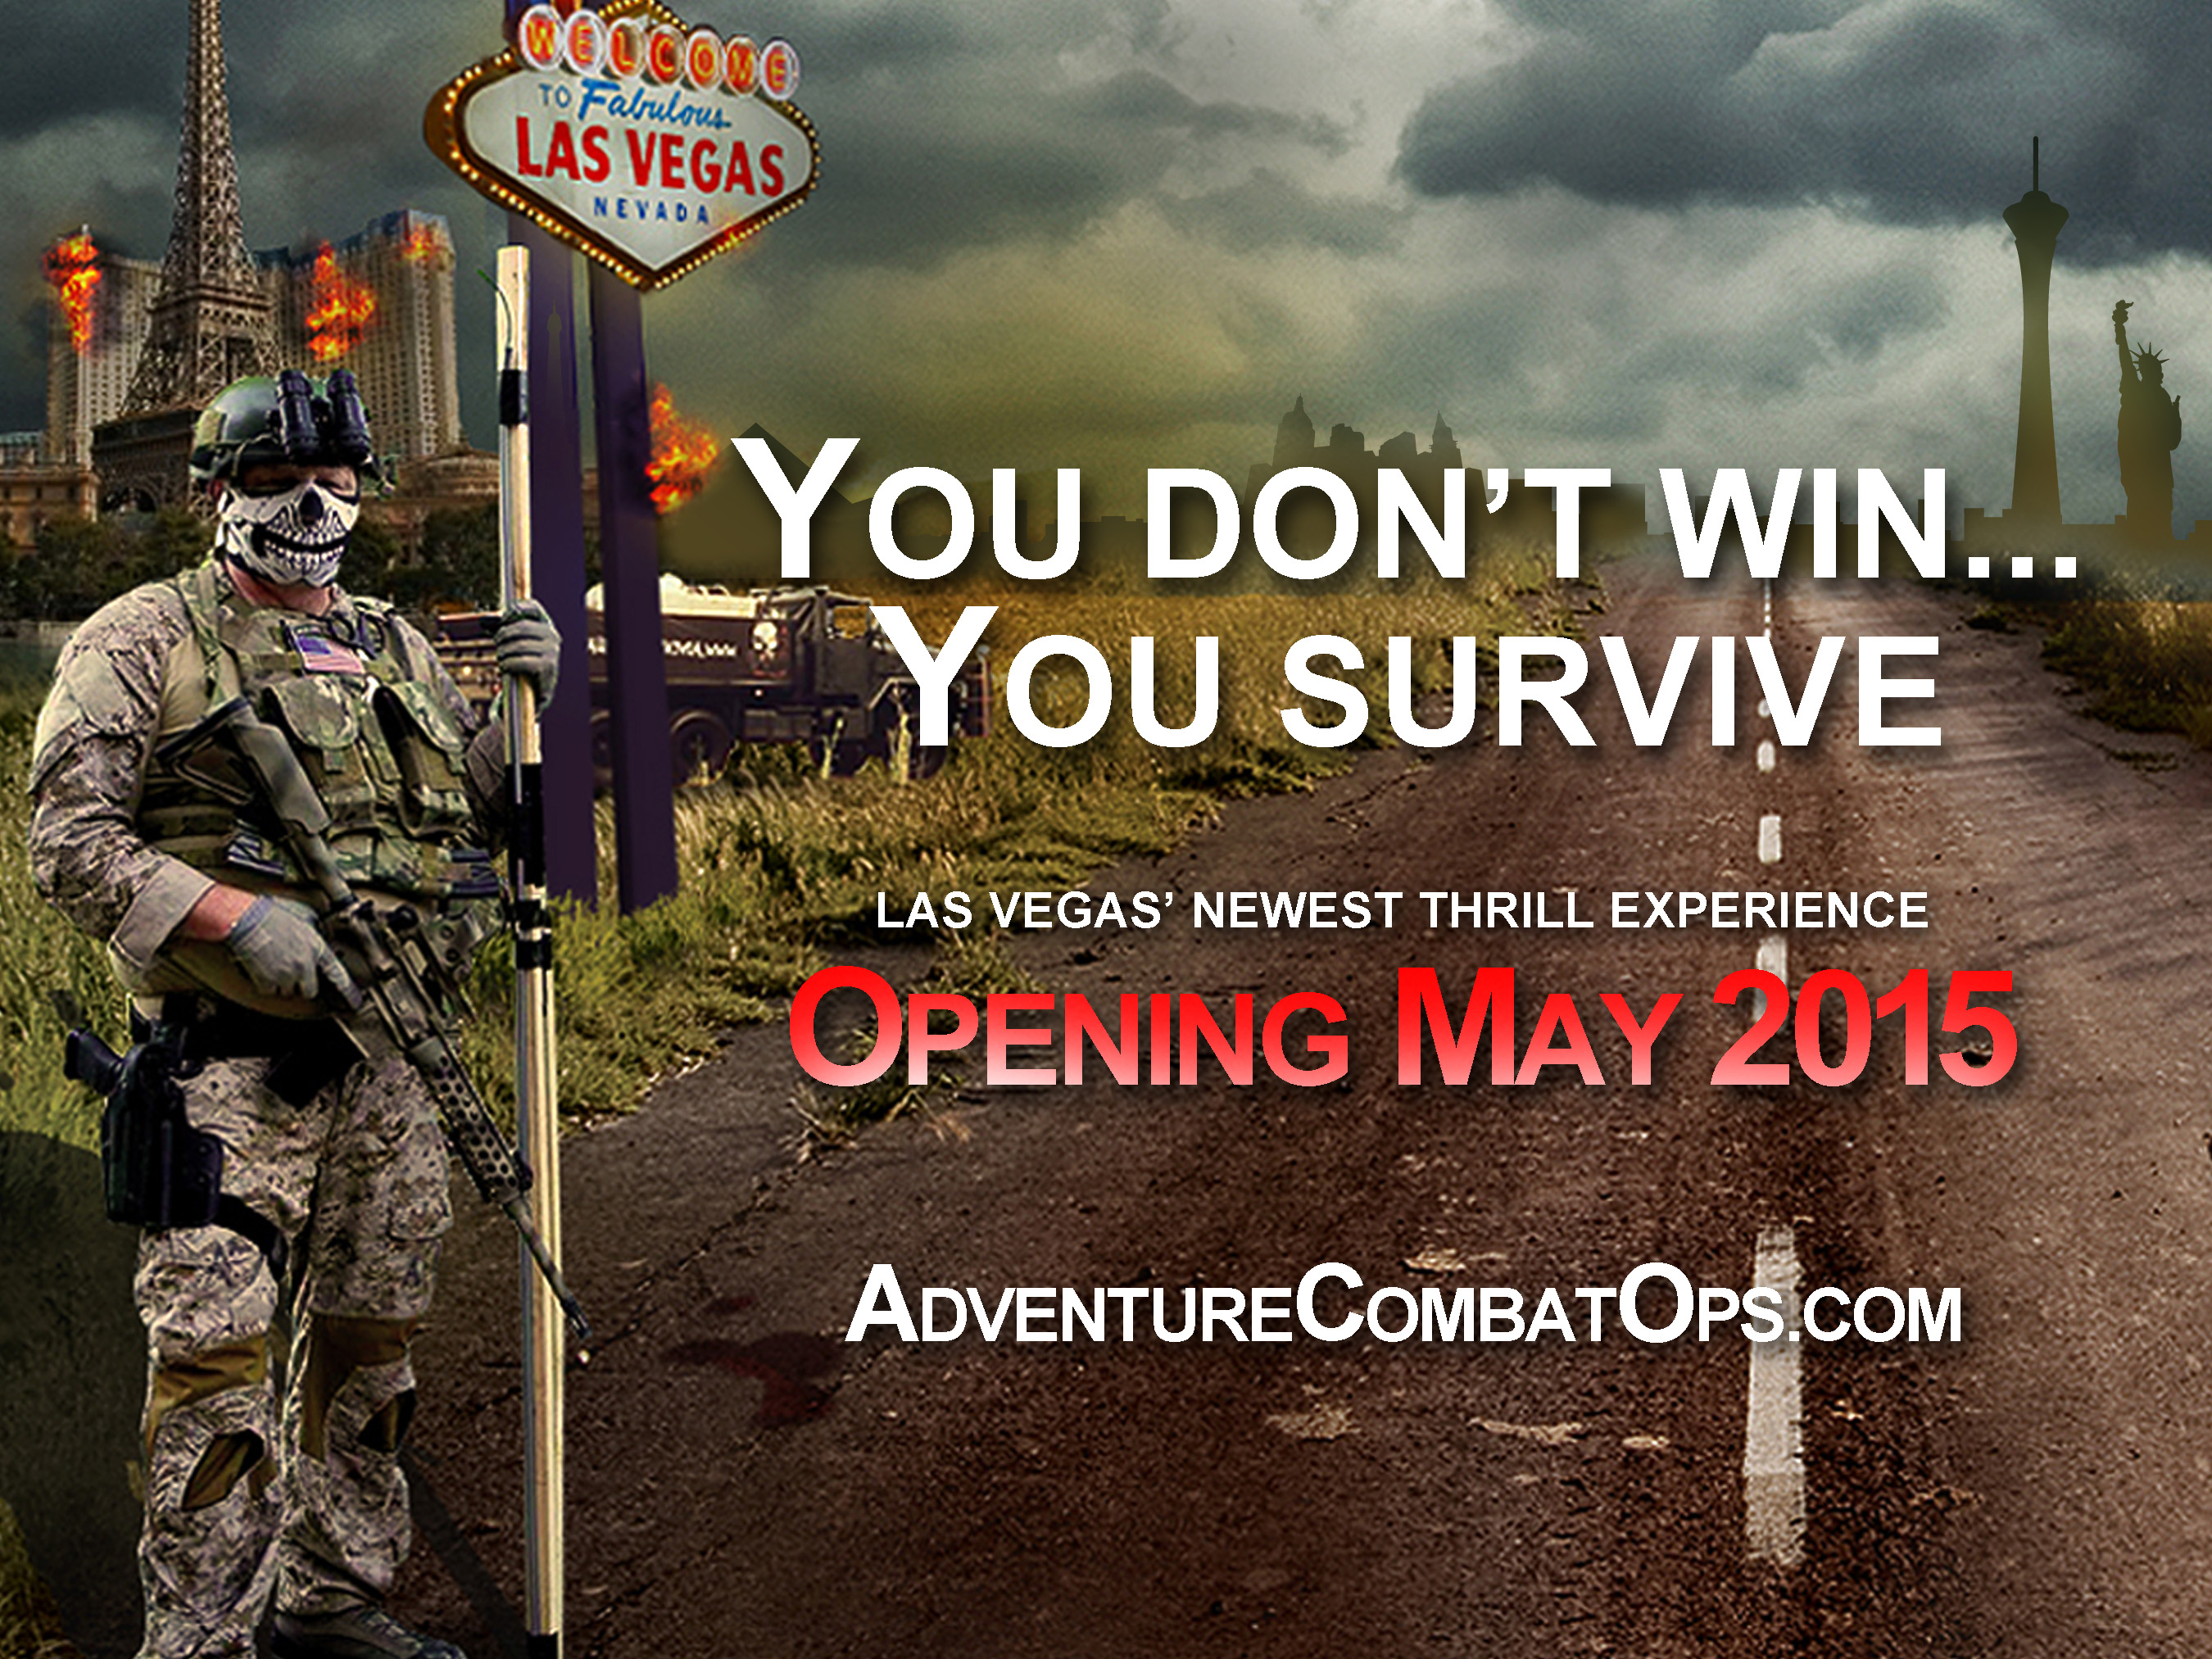 Join real American heroes and battle zombies in the most realistic, apocalyptic, combat simulation in the world launching in May 2015 at Adventure Combat Ops in Las Vegas, Nevada.